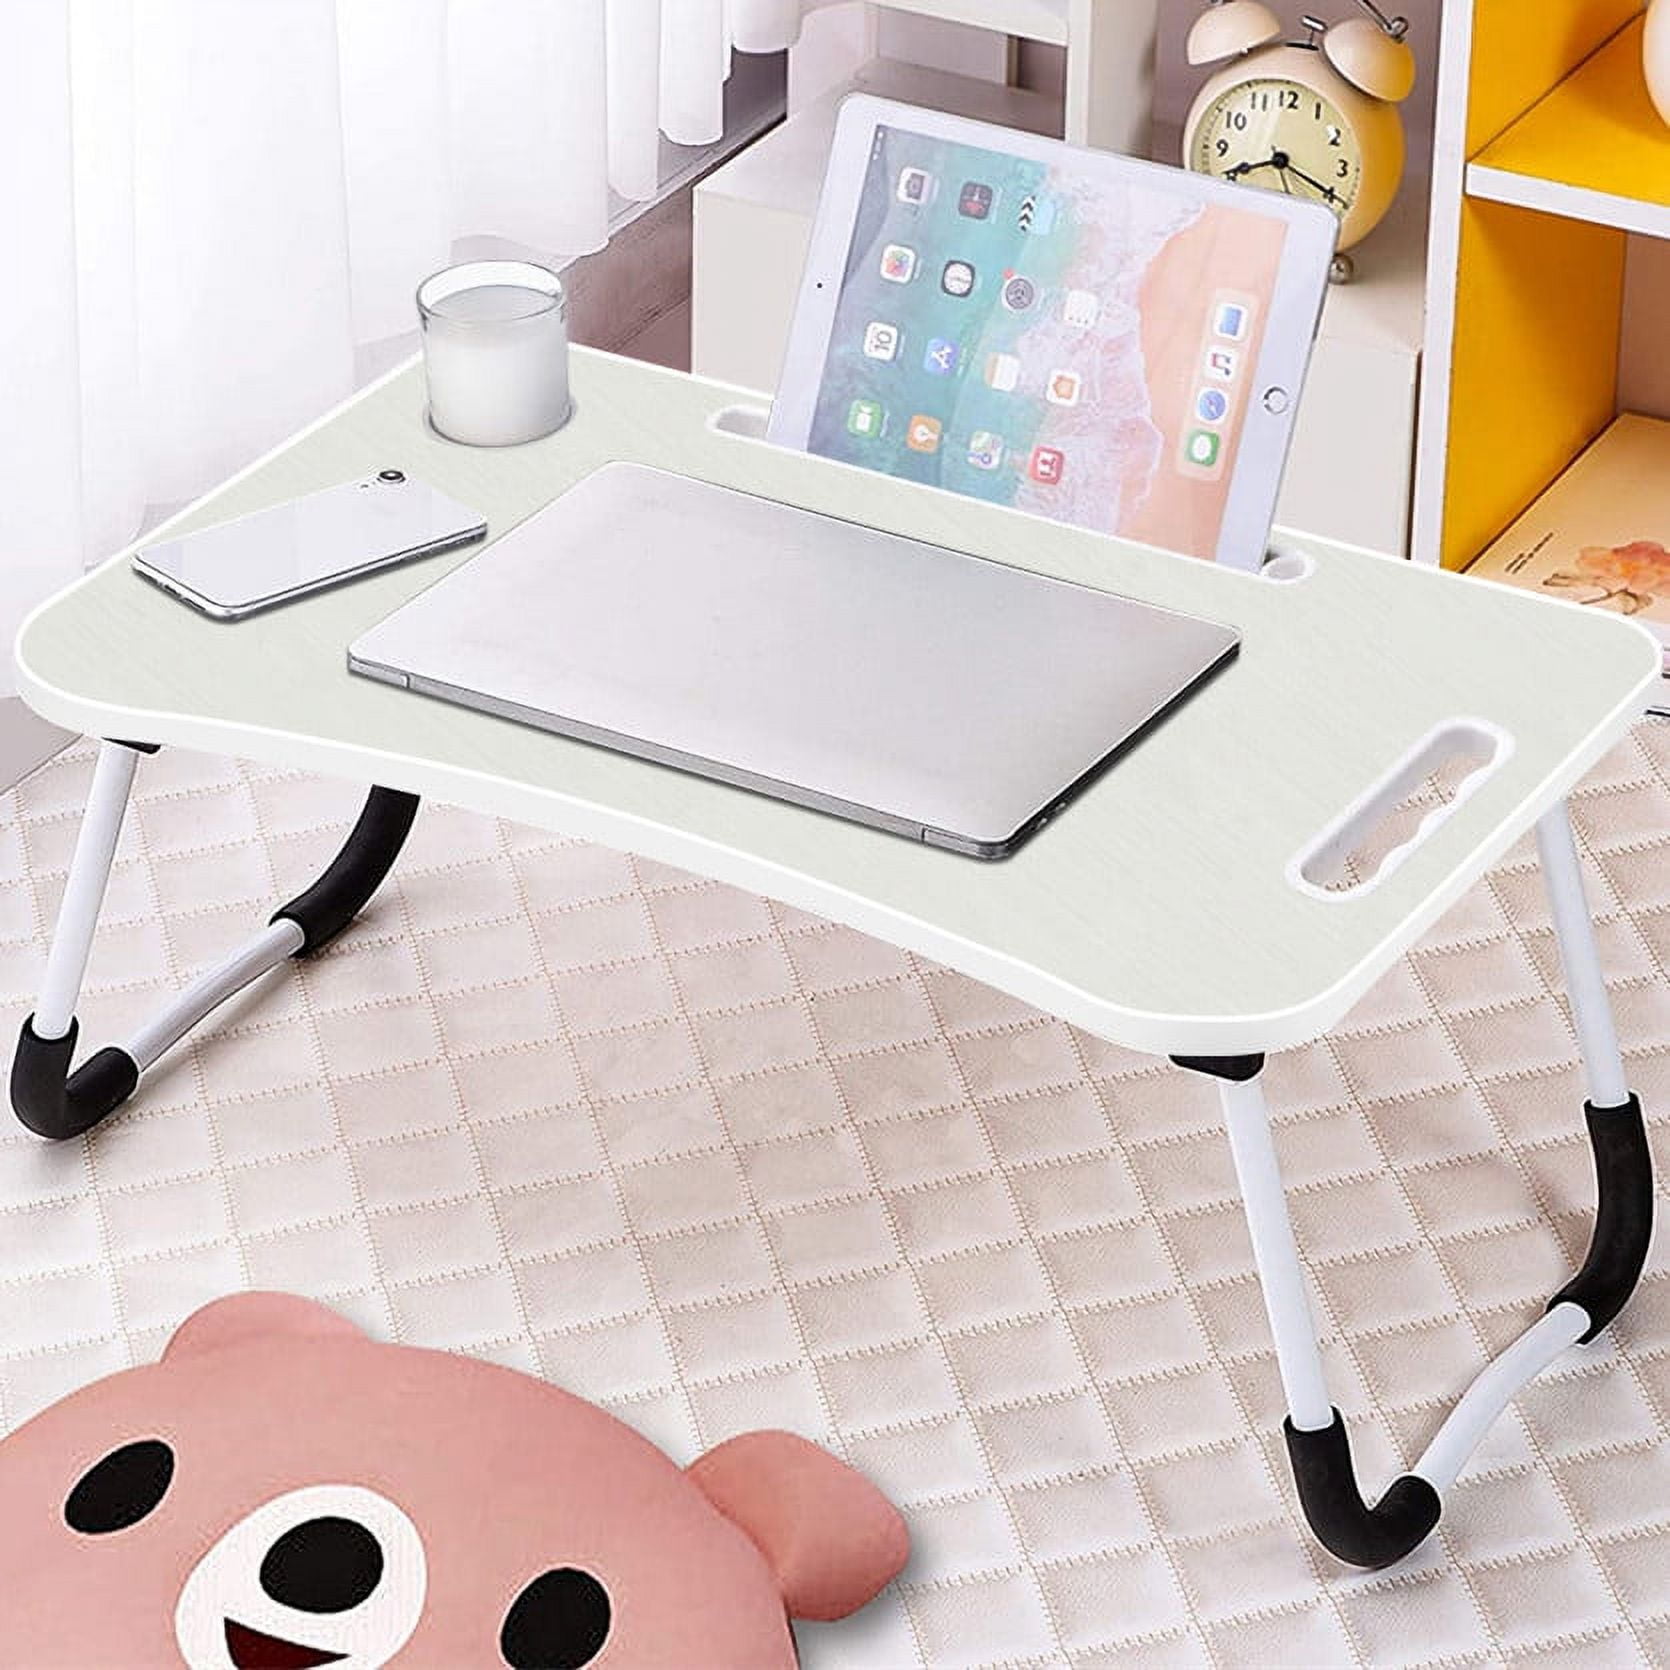 Lap Desk Stand, Foldable Laptop Bed Desk with Legs, Portable Laptop Bed  Tray with iPad Slots, Small Lazy Laptop Table for Adults/Students/Kids,  Eating Working Gaming Desk for Couch/Sofa/Floor, HJ1840 